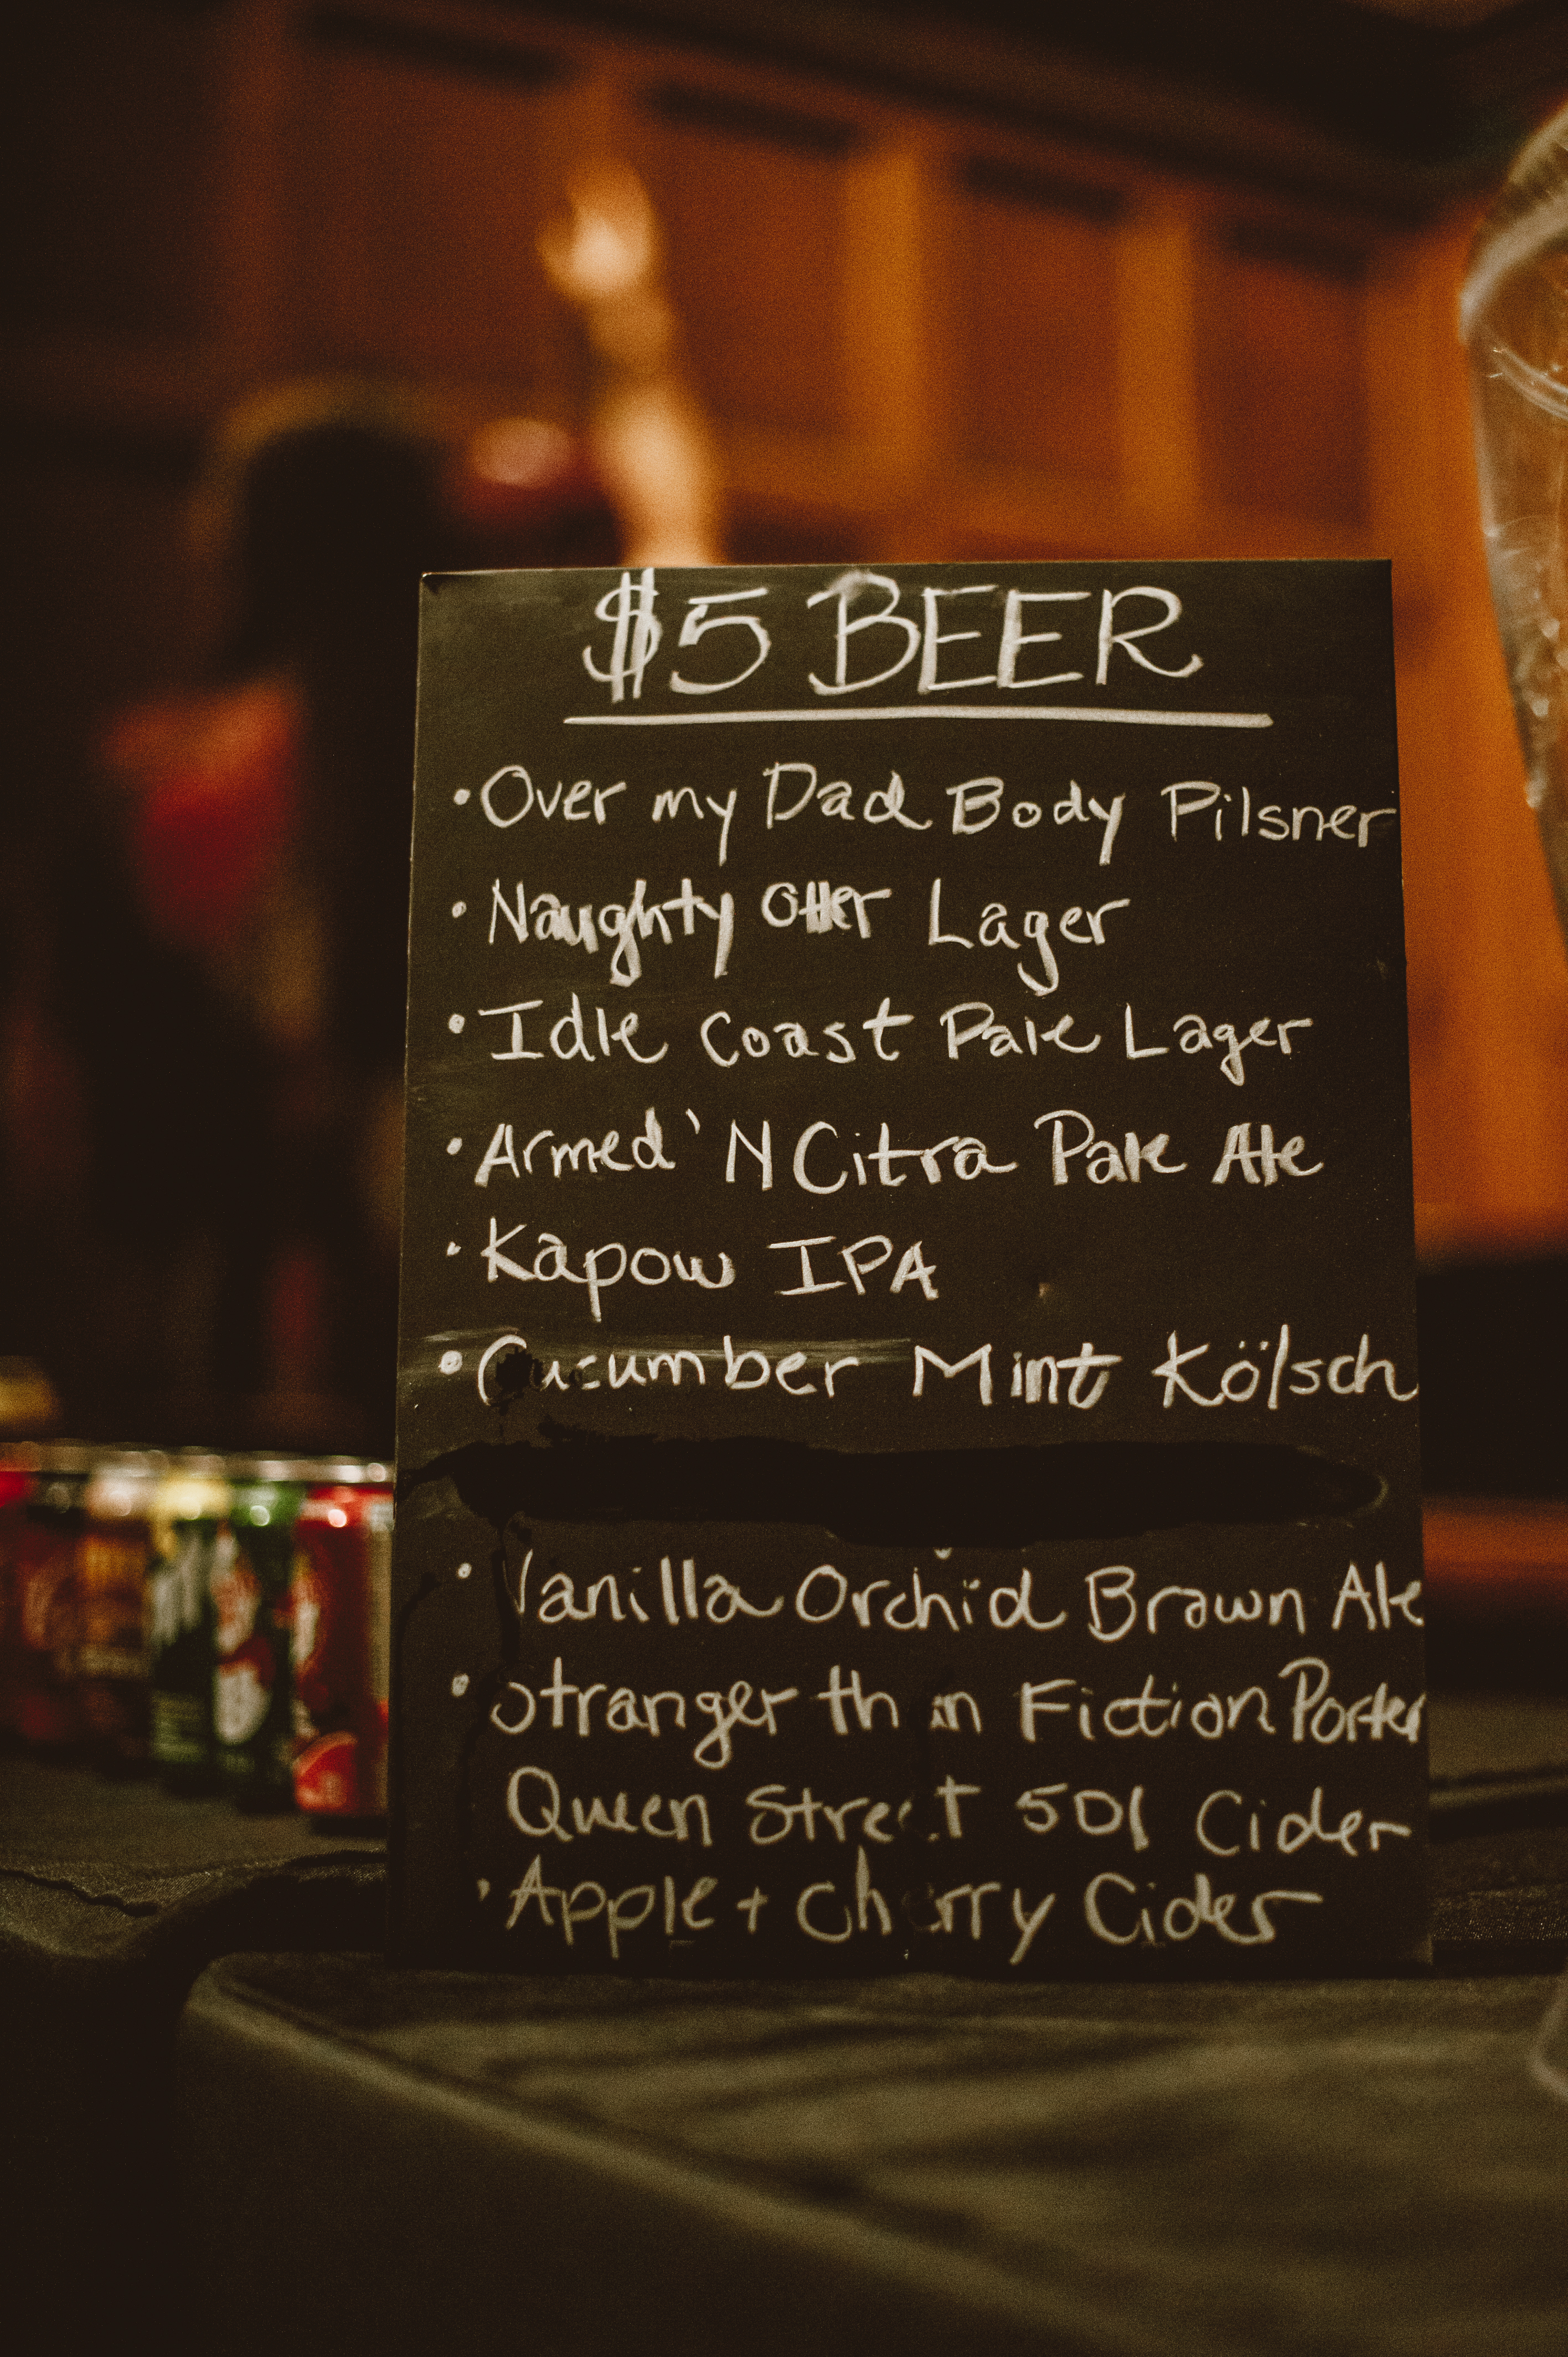 A chalk board sign showing the list of beer selections